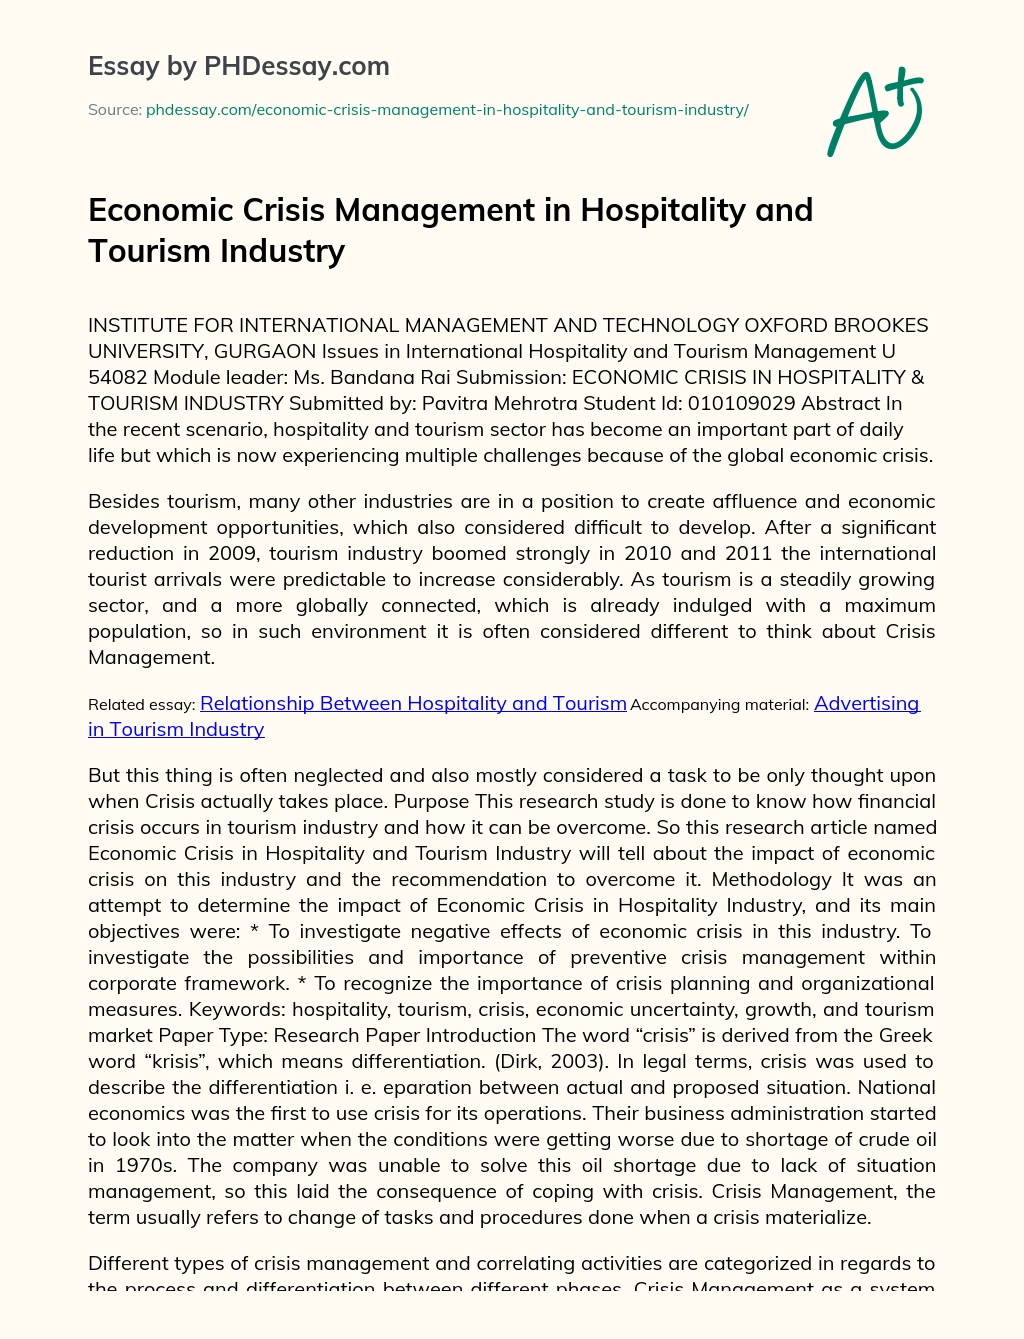 Economic Crisis Management in Hospitality and Tourism Industry essay